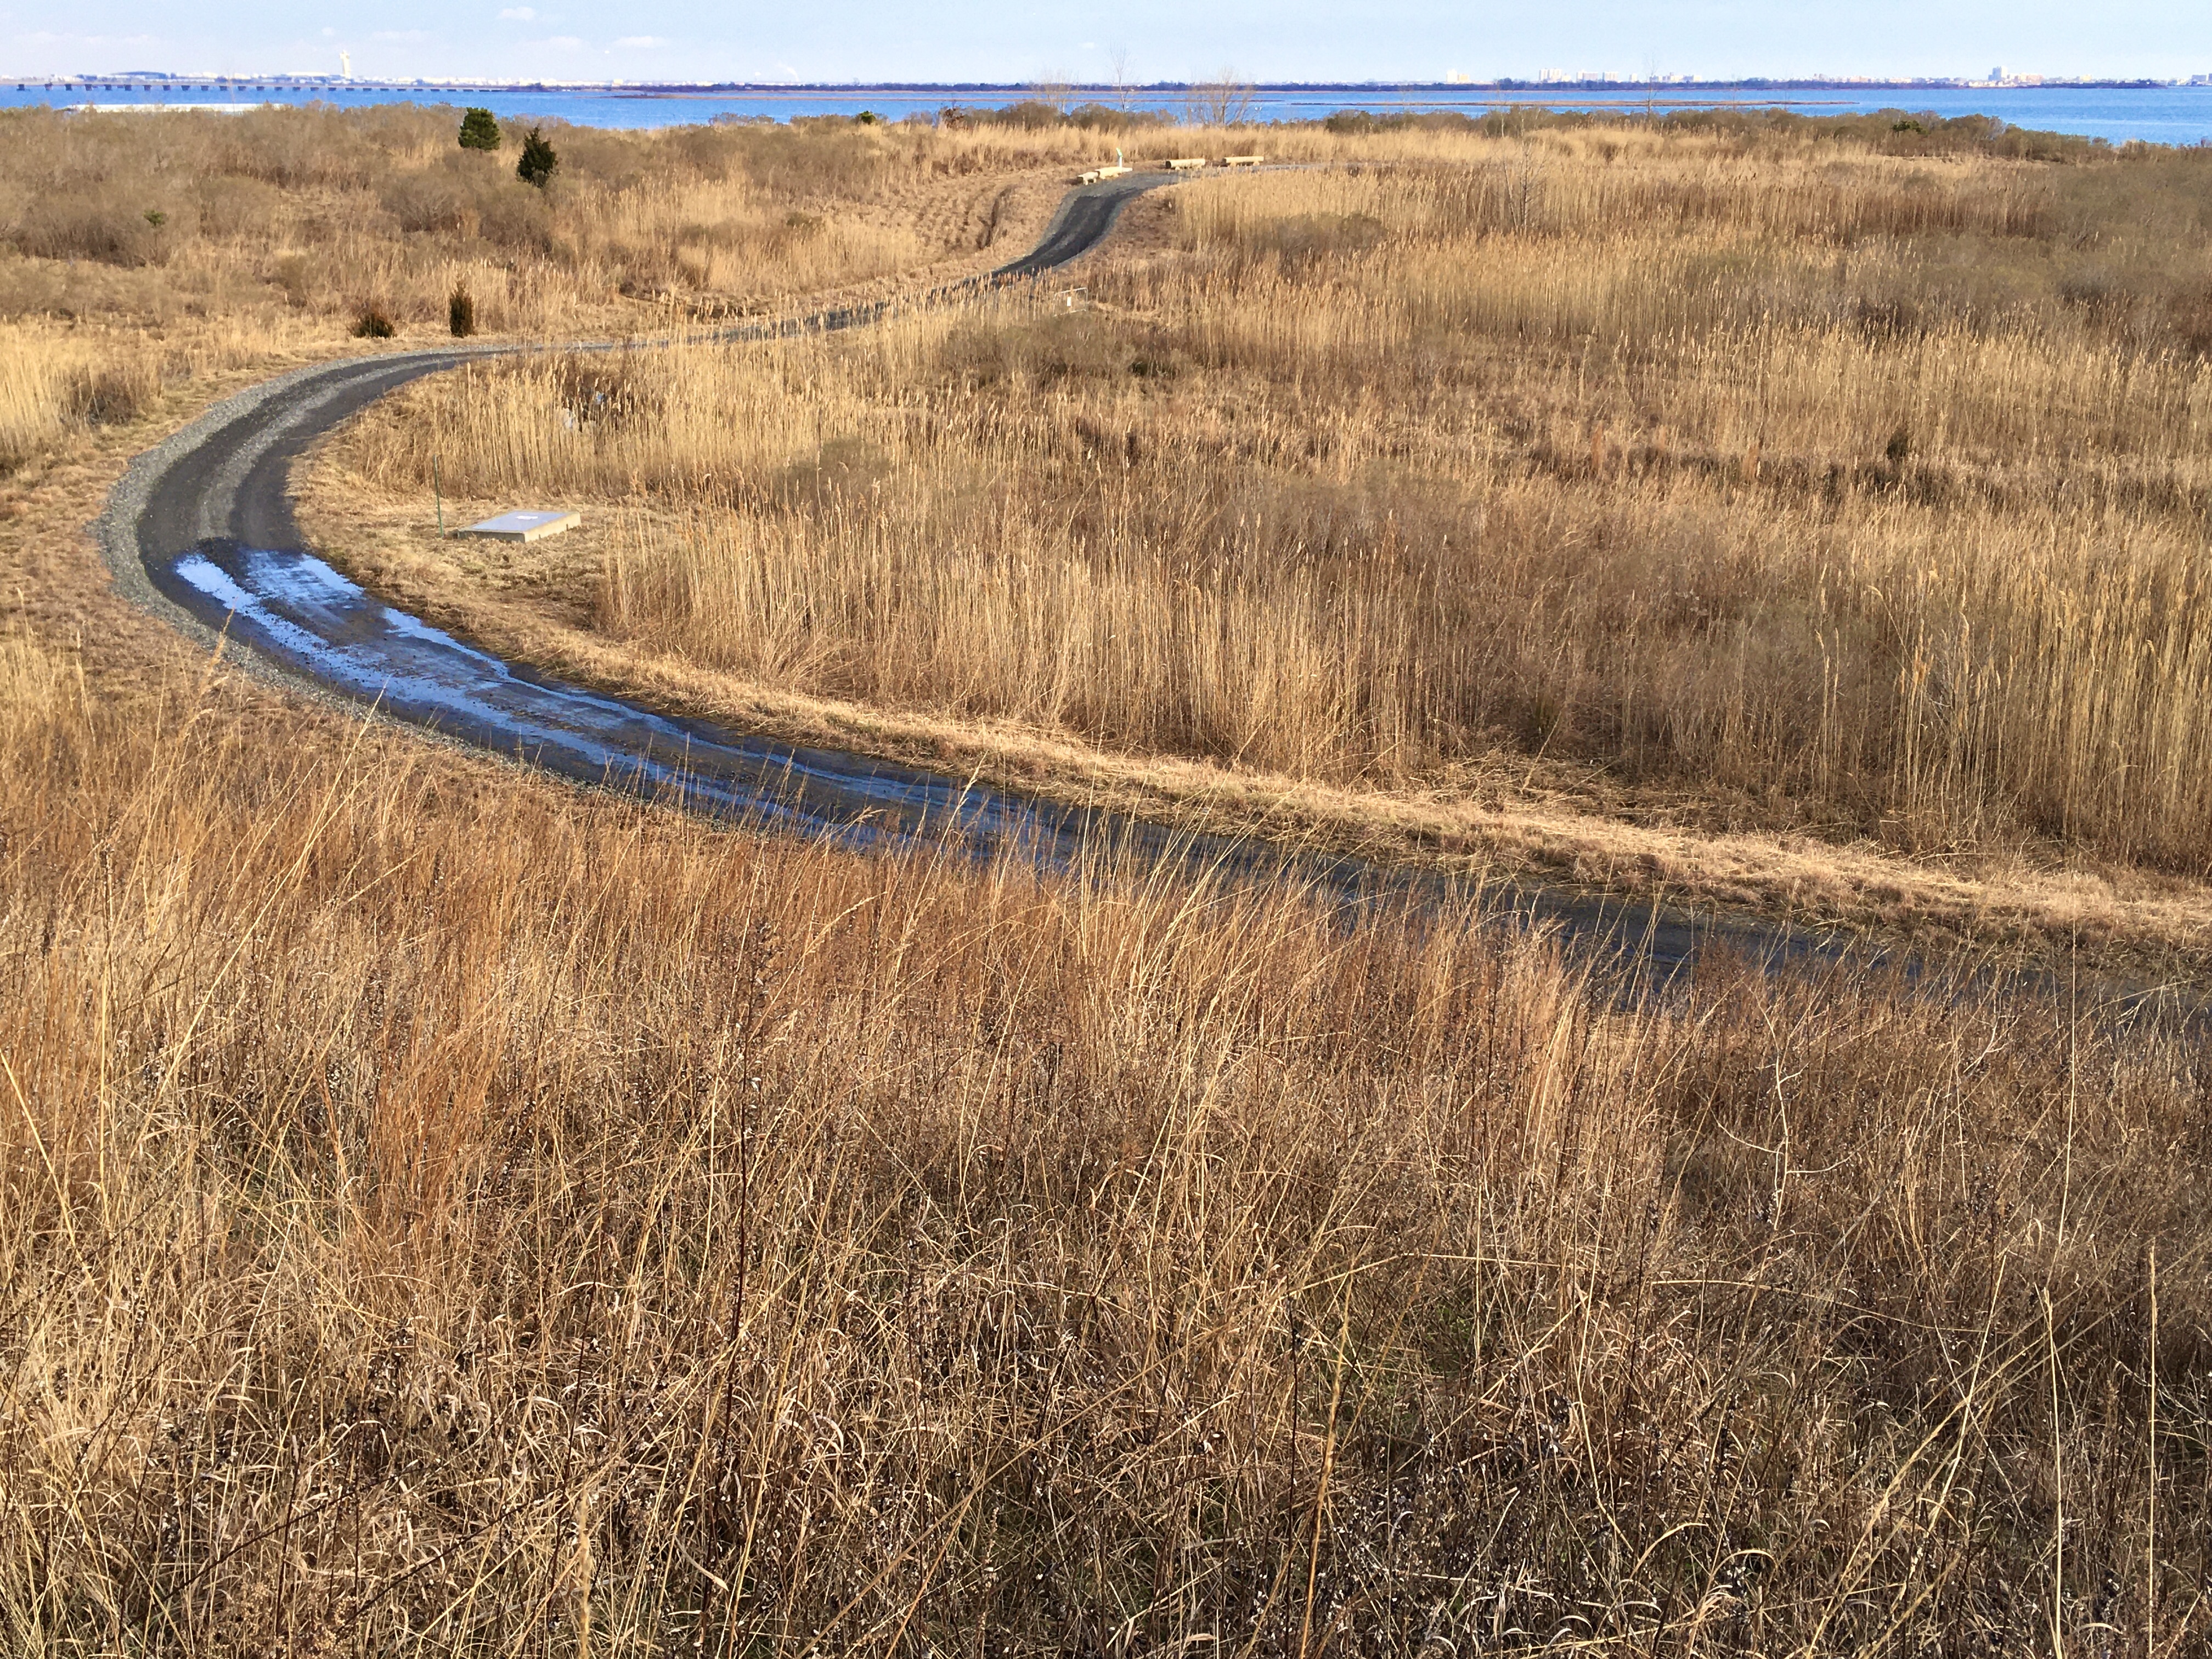 Peregrine Trail snakes through the prairie grass at Shirley Chisholm State Park. Photo: Lore Croghan/Brooklyn Eagle